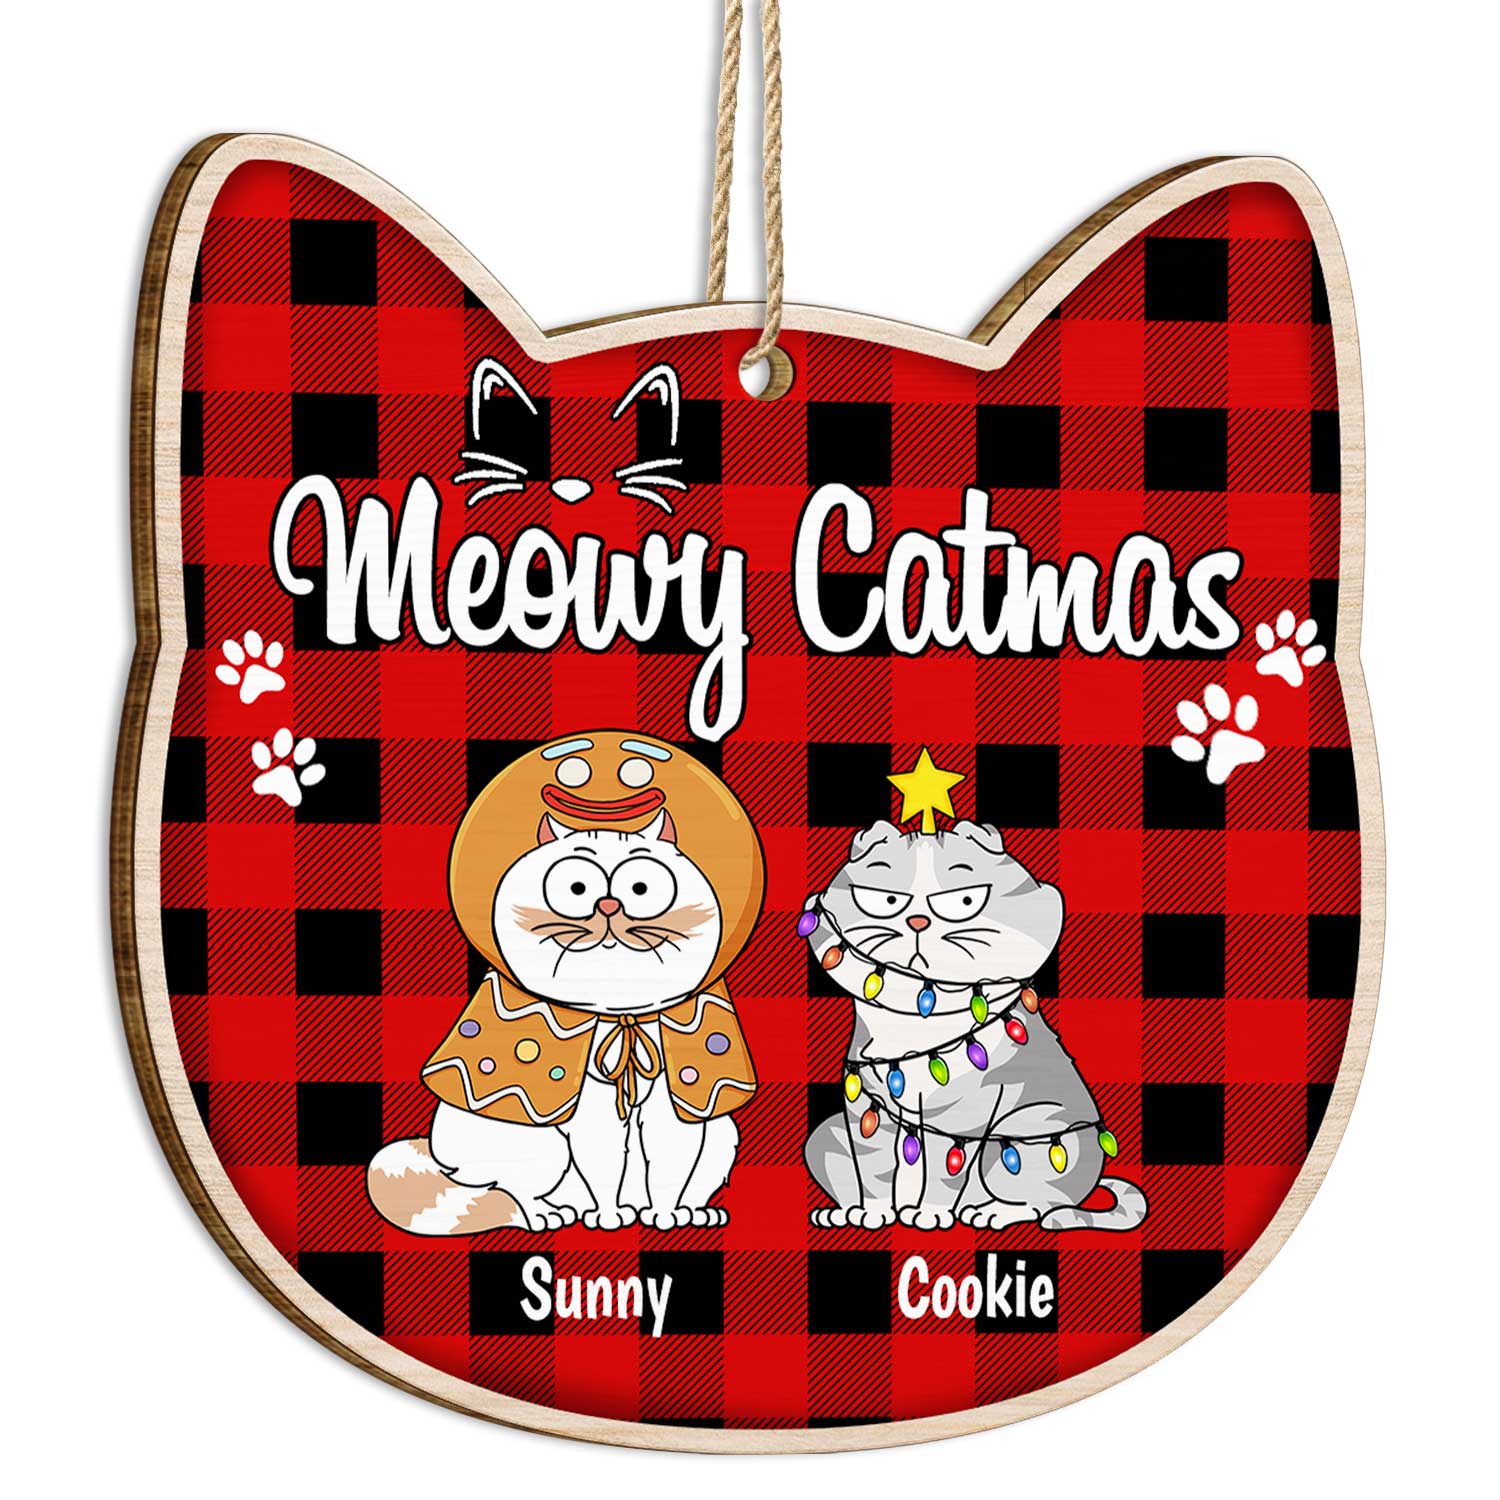 Meowy Catmas - Christmas Gift For Cat Lovers - Personalized Custom Shaped Wooden Ornament